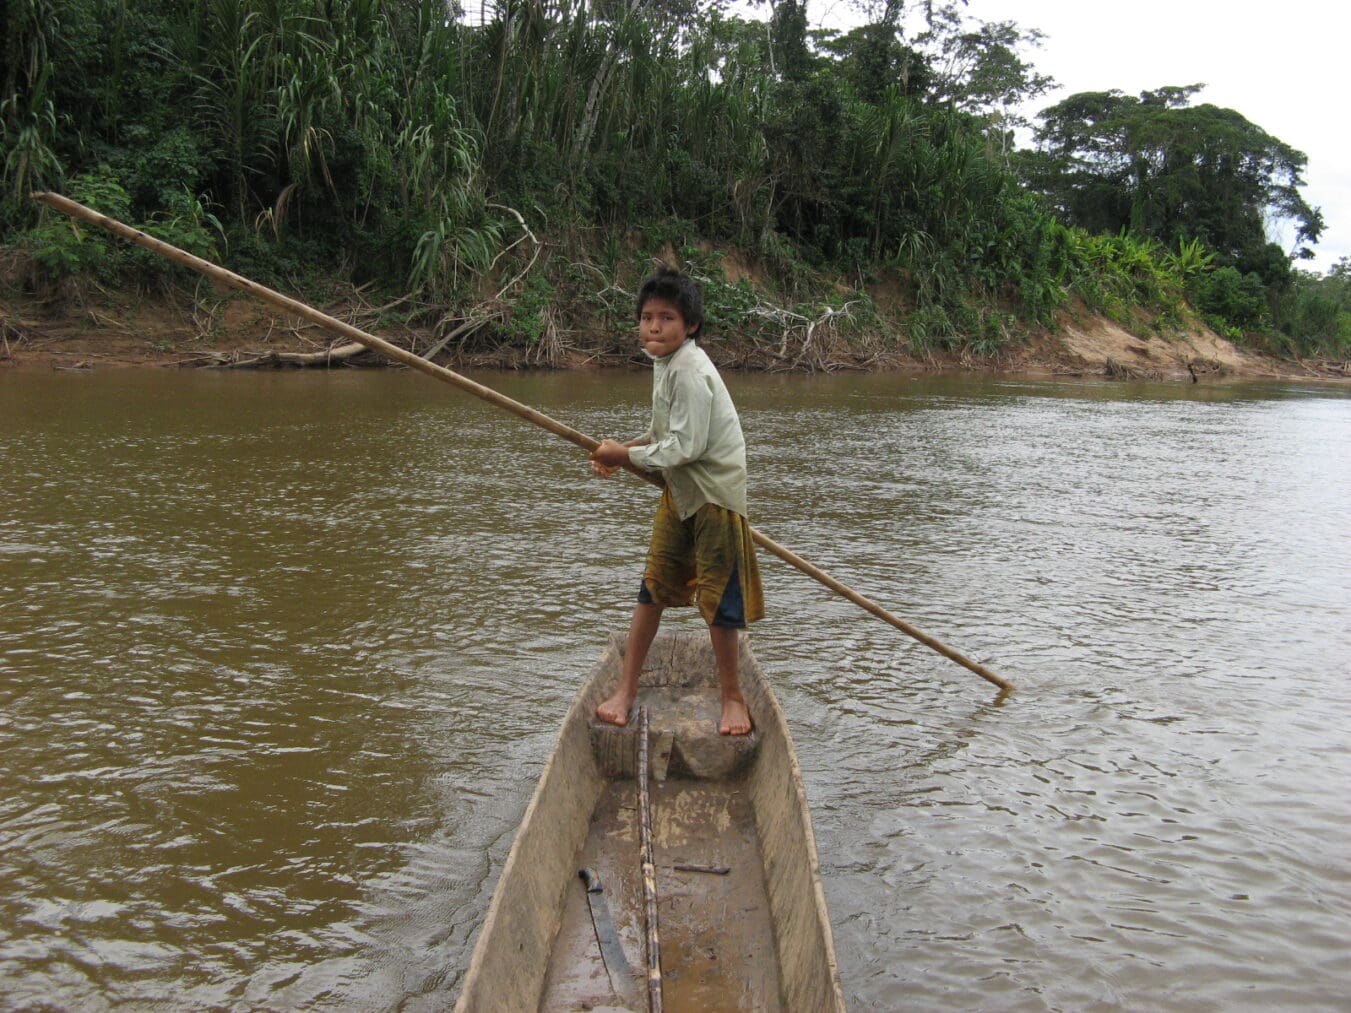 A young member of the Tsimane indigenous group in the Bolivian Amazon in a canoe (photo courtesy Tsimane Health and Life History Project Team)